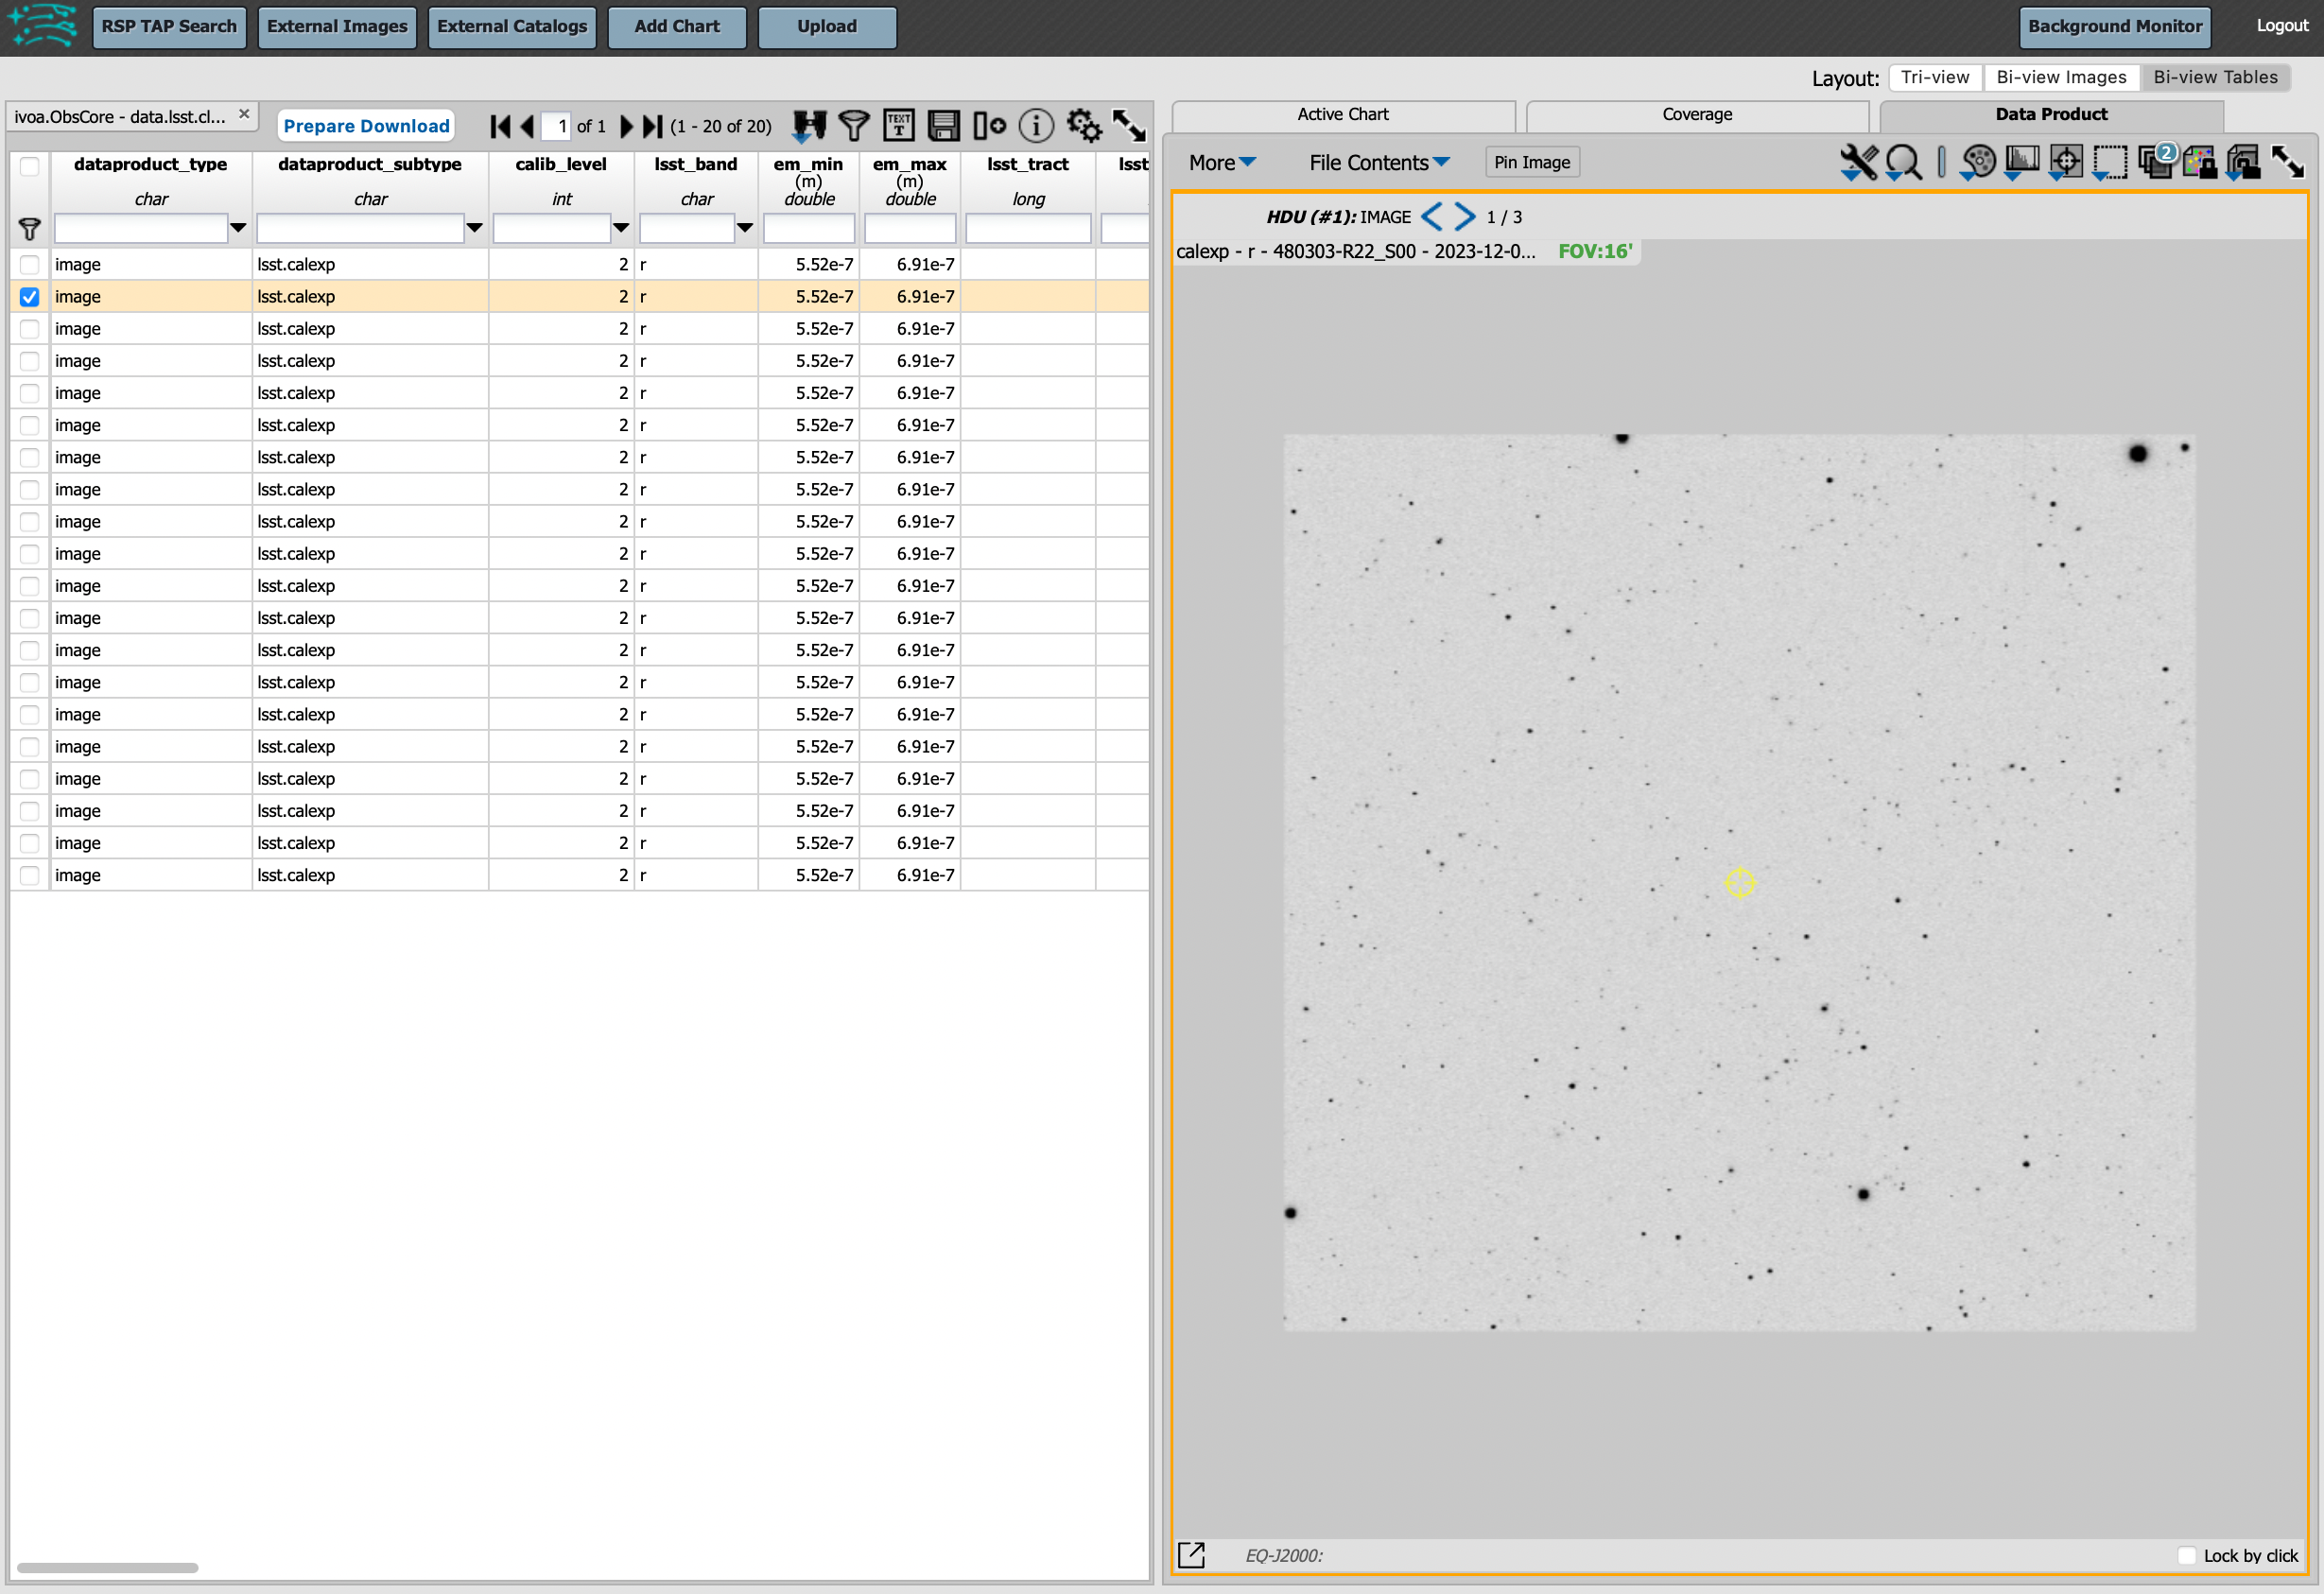 Screenshot of a portal query.  The left image shows and image of the sky.  The right image shows the data table with one row selected, that row selects the image on the left.